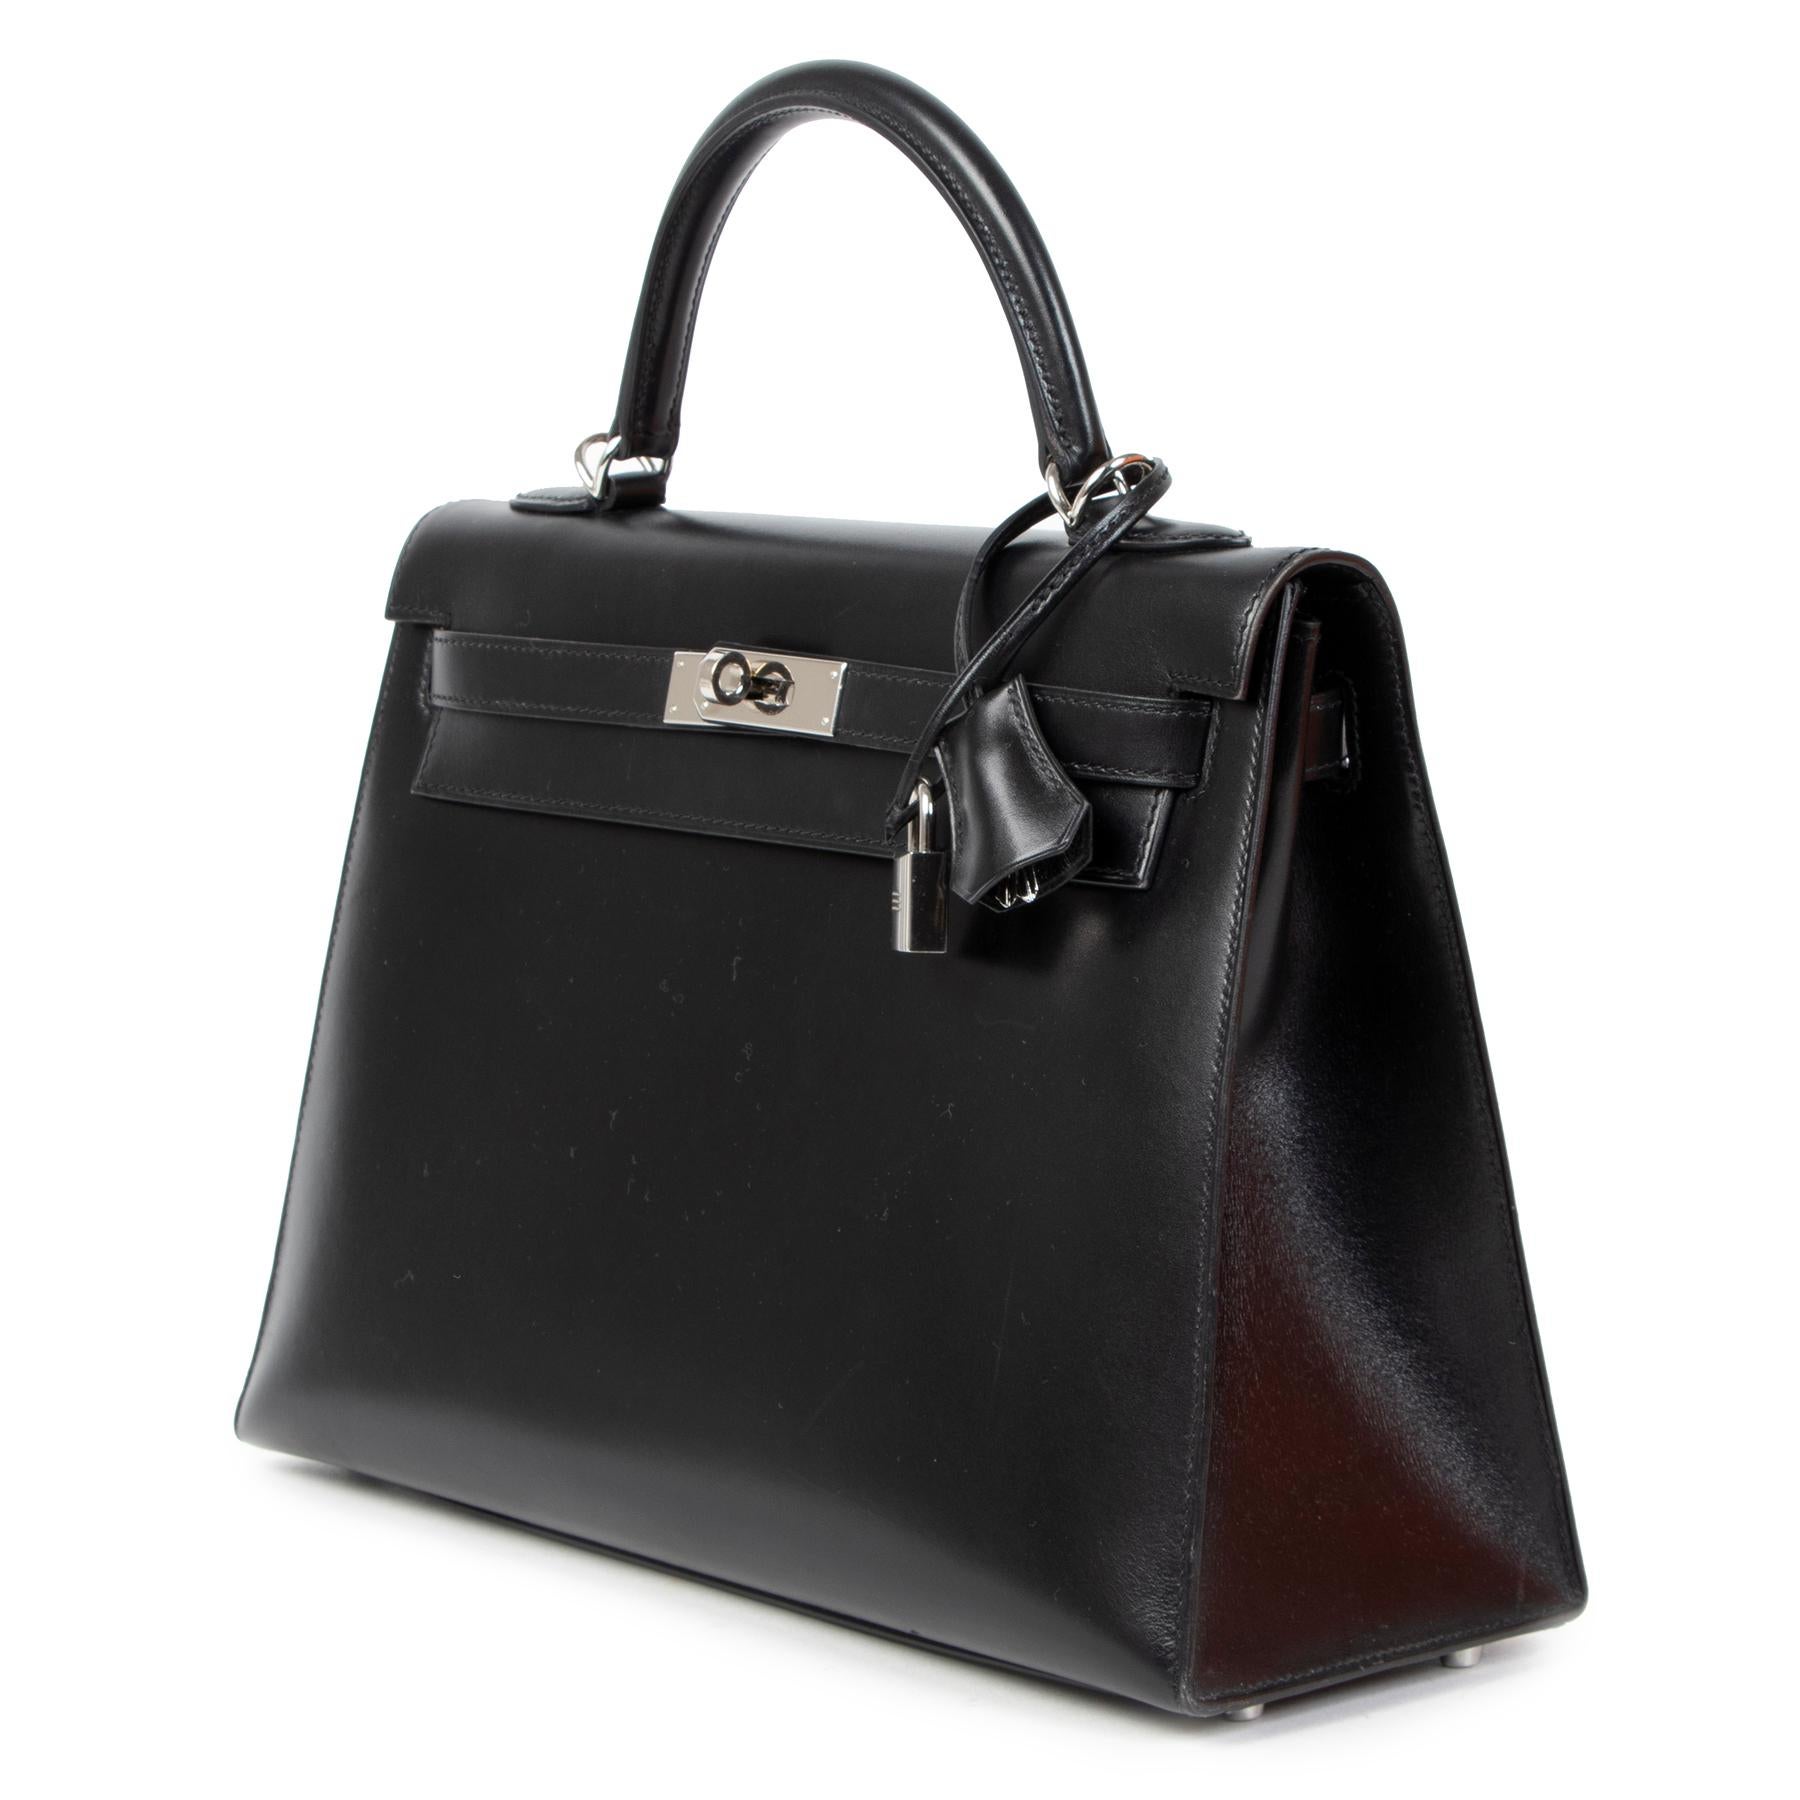 COLLECTOR ITEM 
very good condition

Hermès Kelly 32 Black Boxcalf PHW

Nothing is better than a bag with a rich history, much like this Hermès Kelly bag. 
Today the bag continues to be an absolute icon and it's the perfect investment piece.